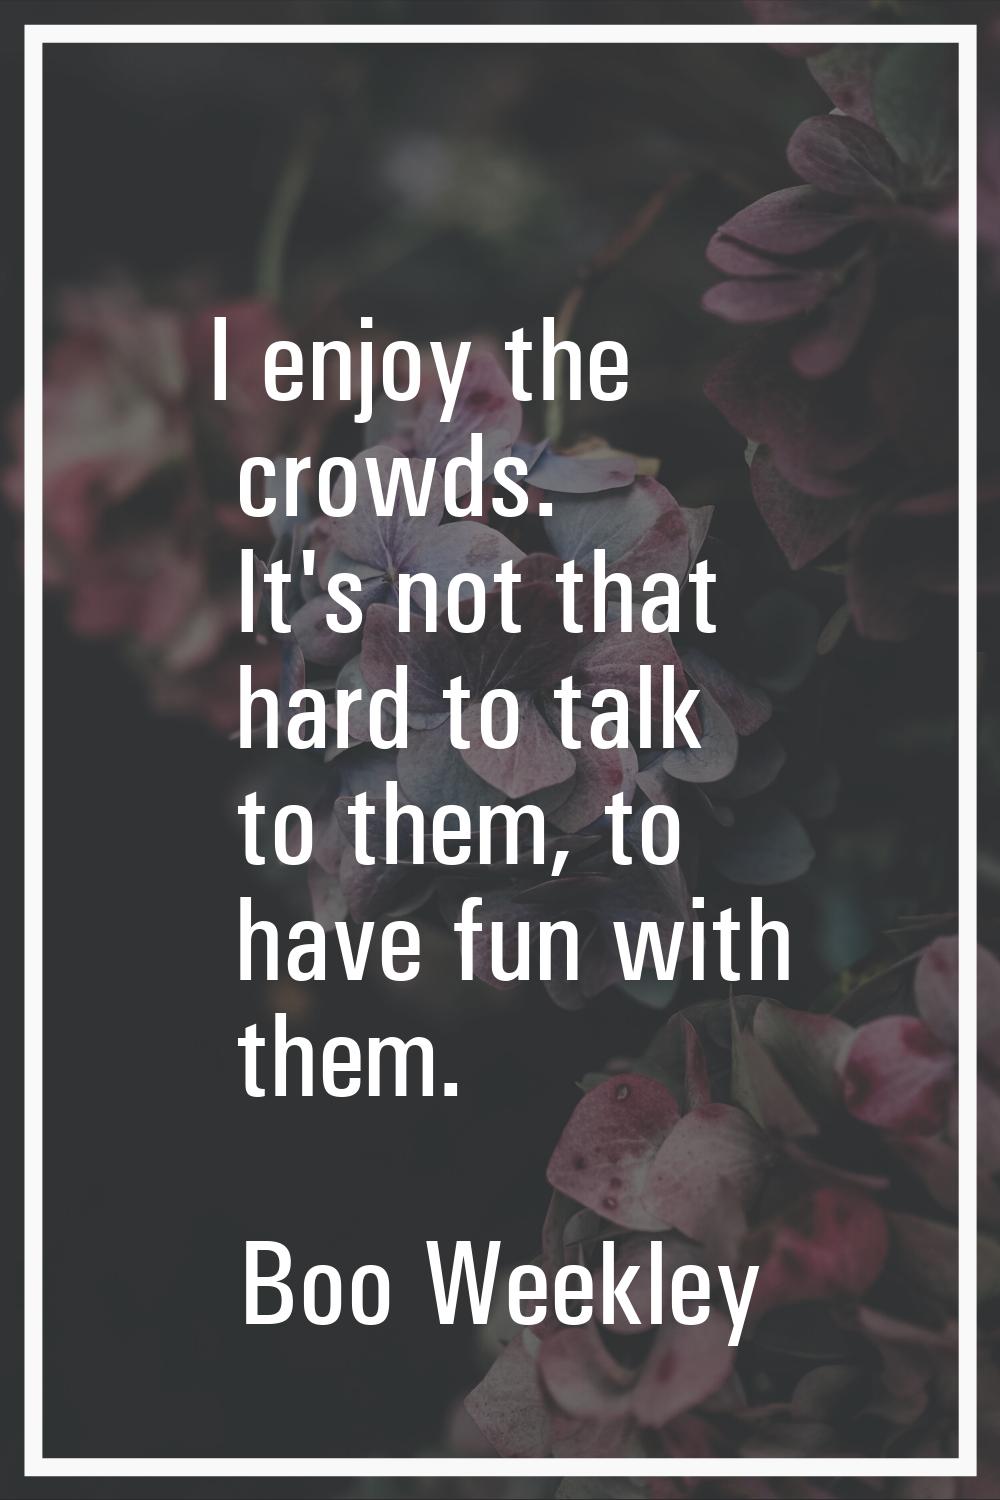 I enjoy the crowds. It's not that hard to talk to them, to have fun with them.